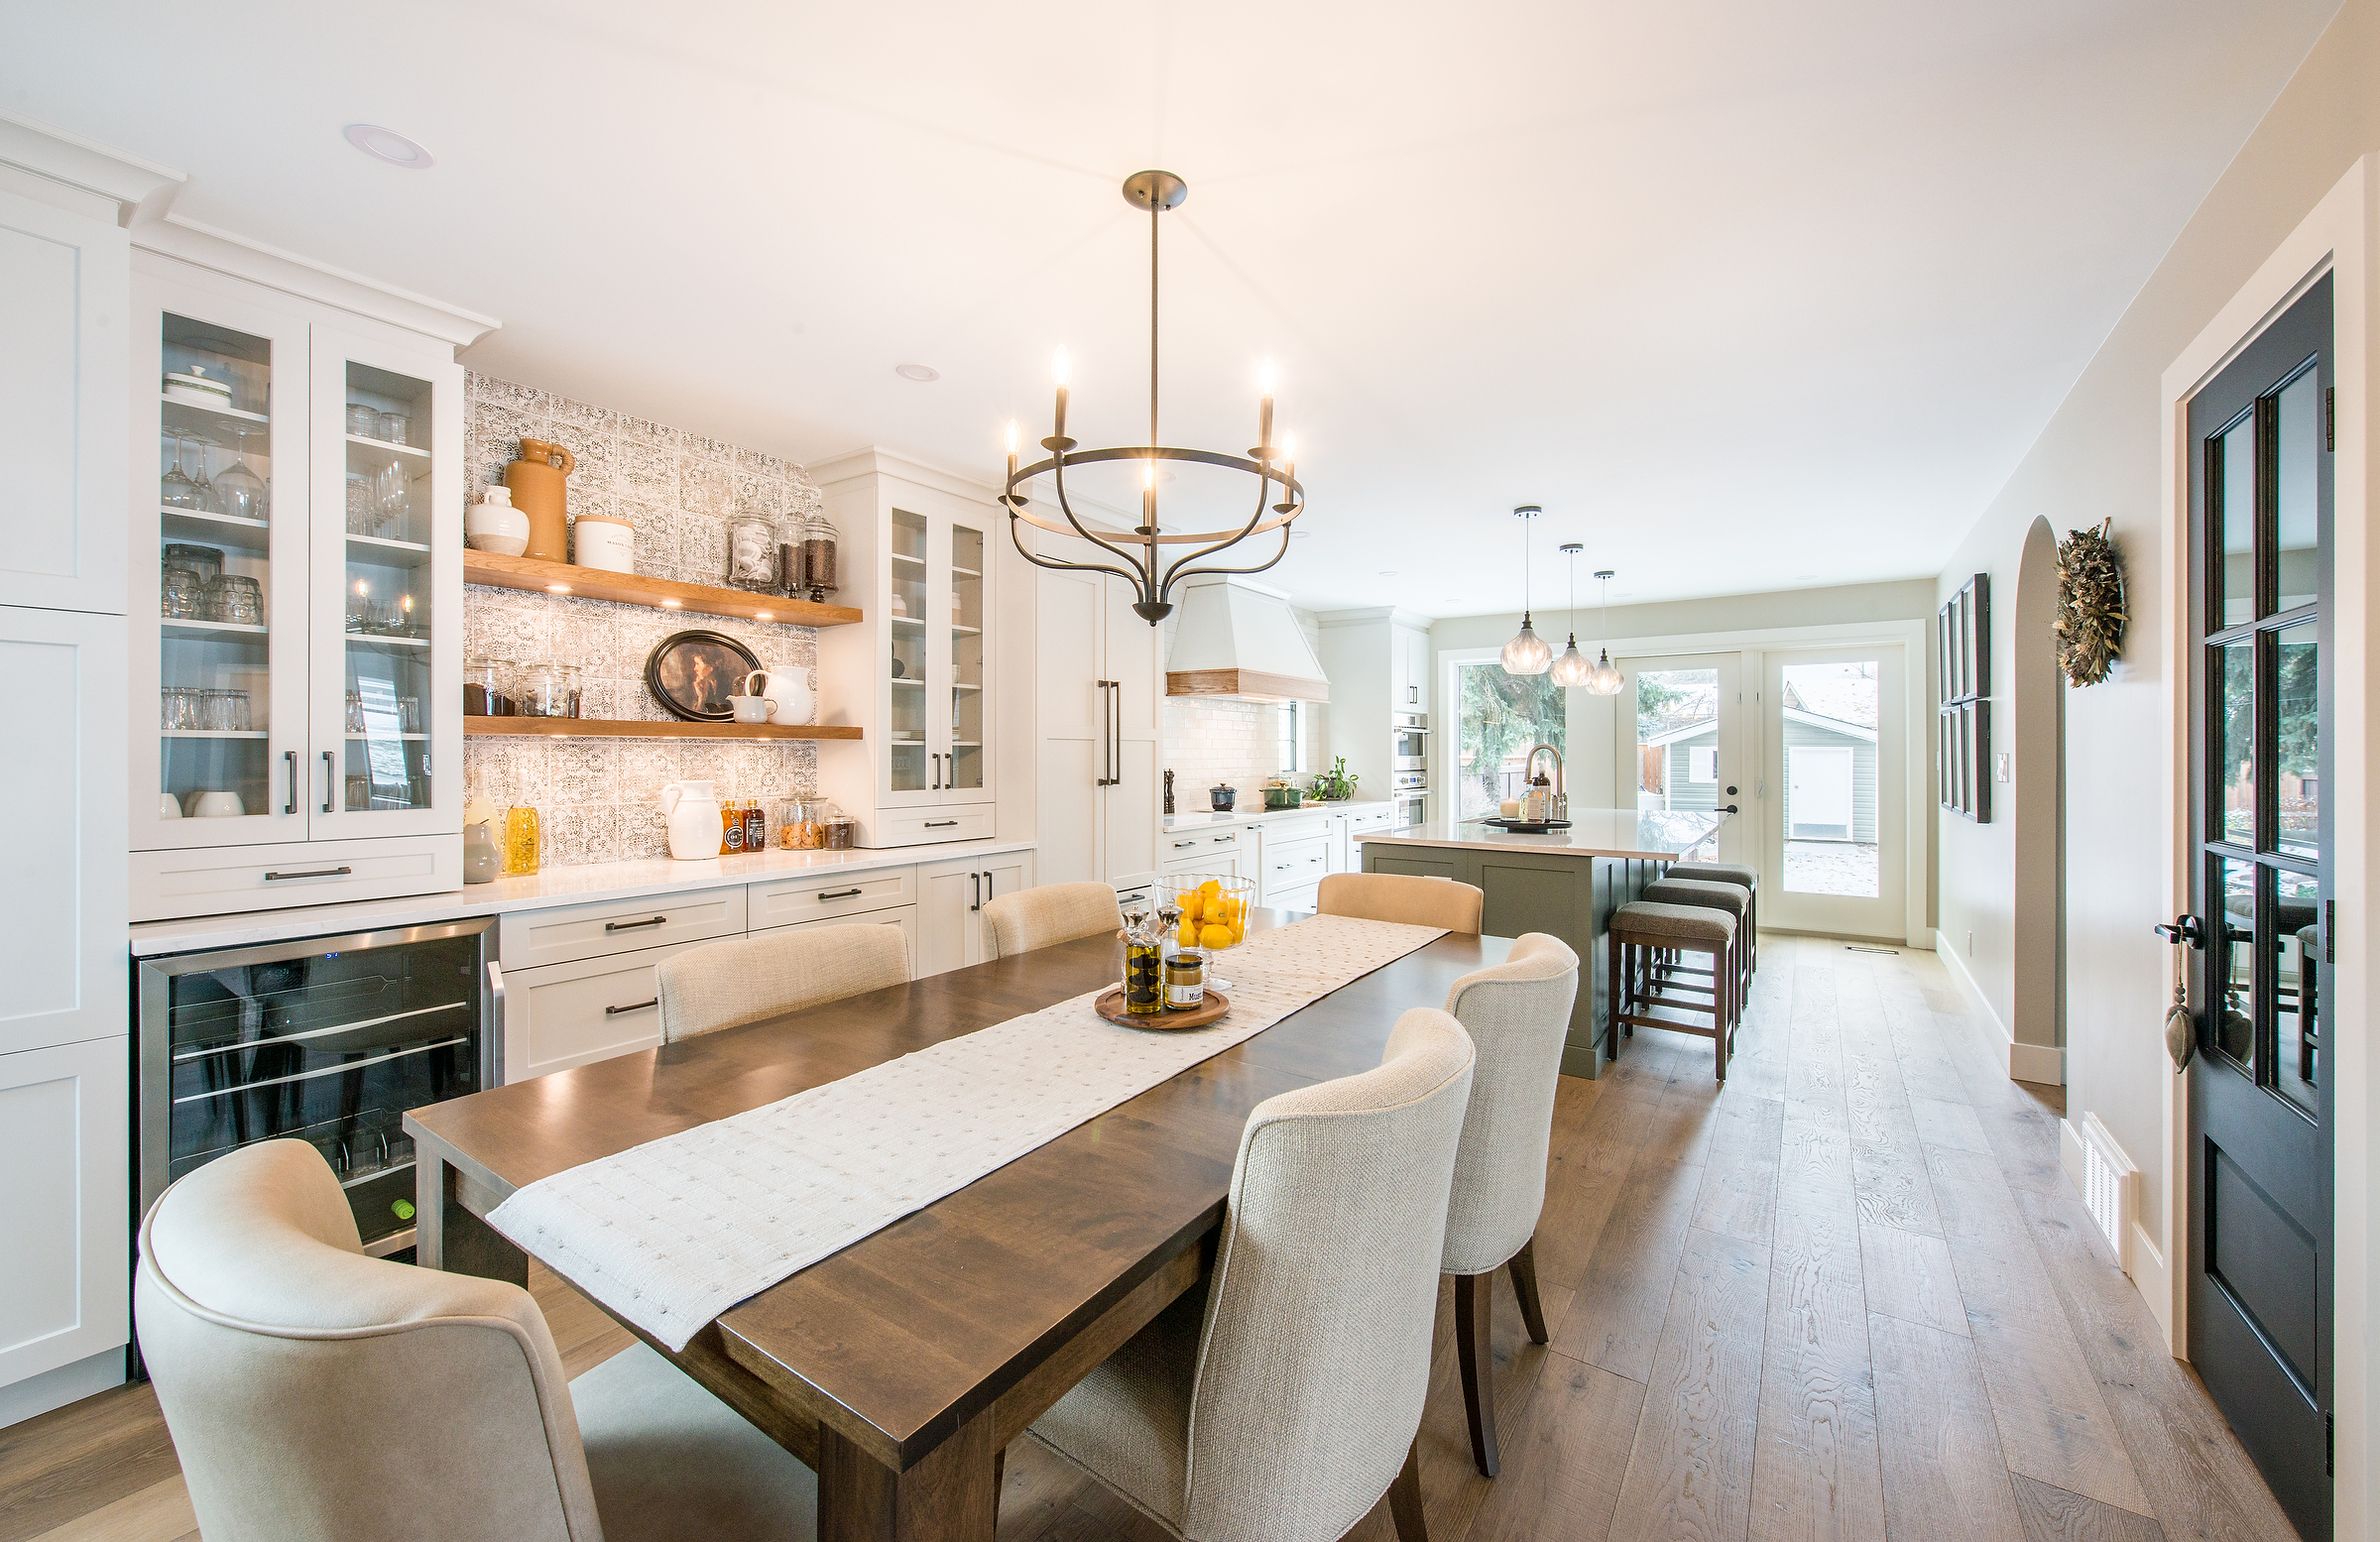 Kitchen renovation with large sage island and beautiful custom table and chairs